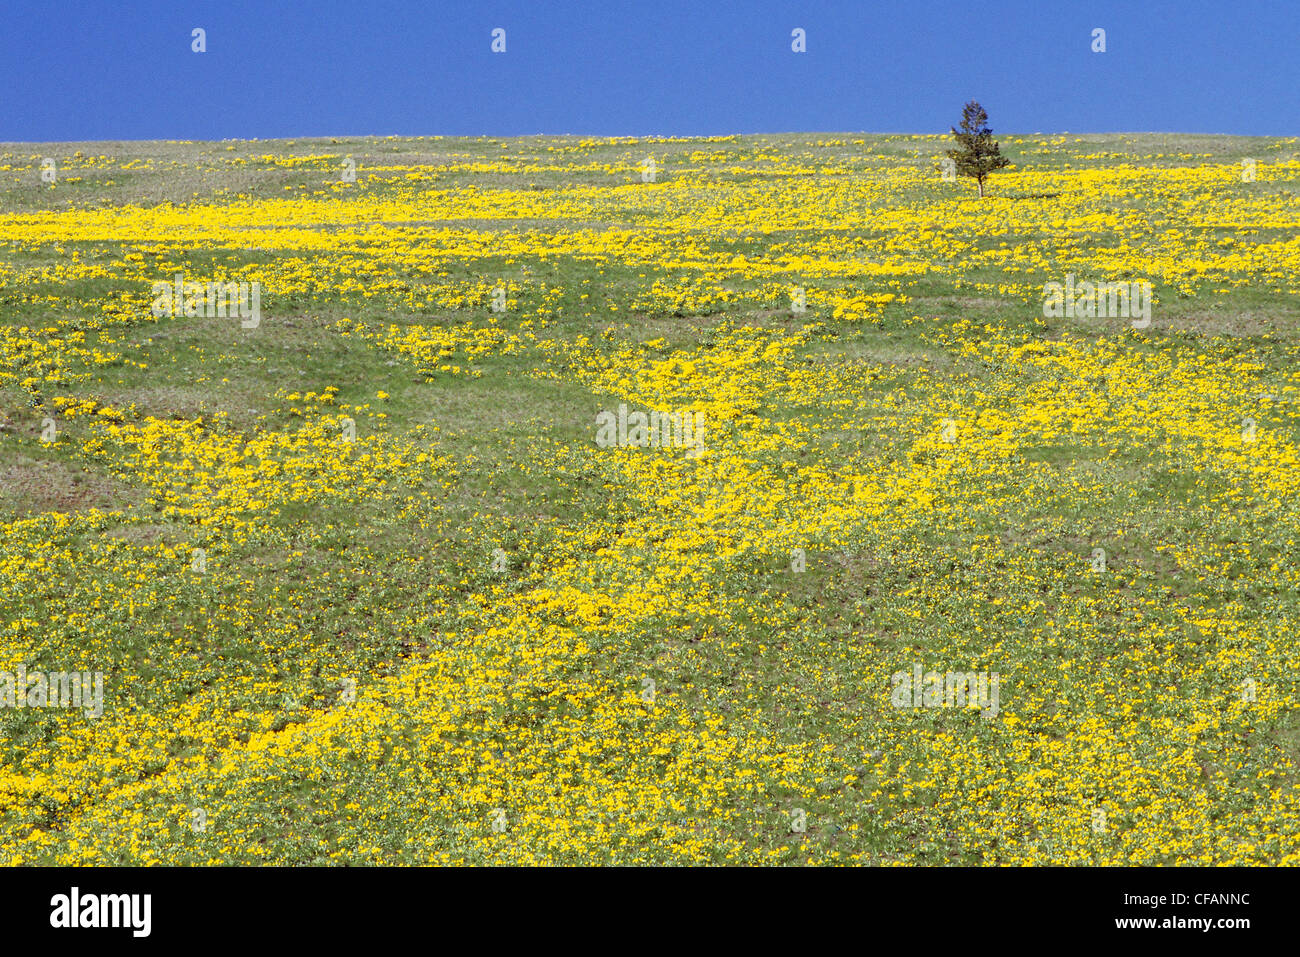 Balsamroot flowers in Junction Sheep Range Provincial Park in the grasslands of British Columbia, Canada Stock Photo